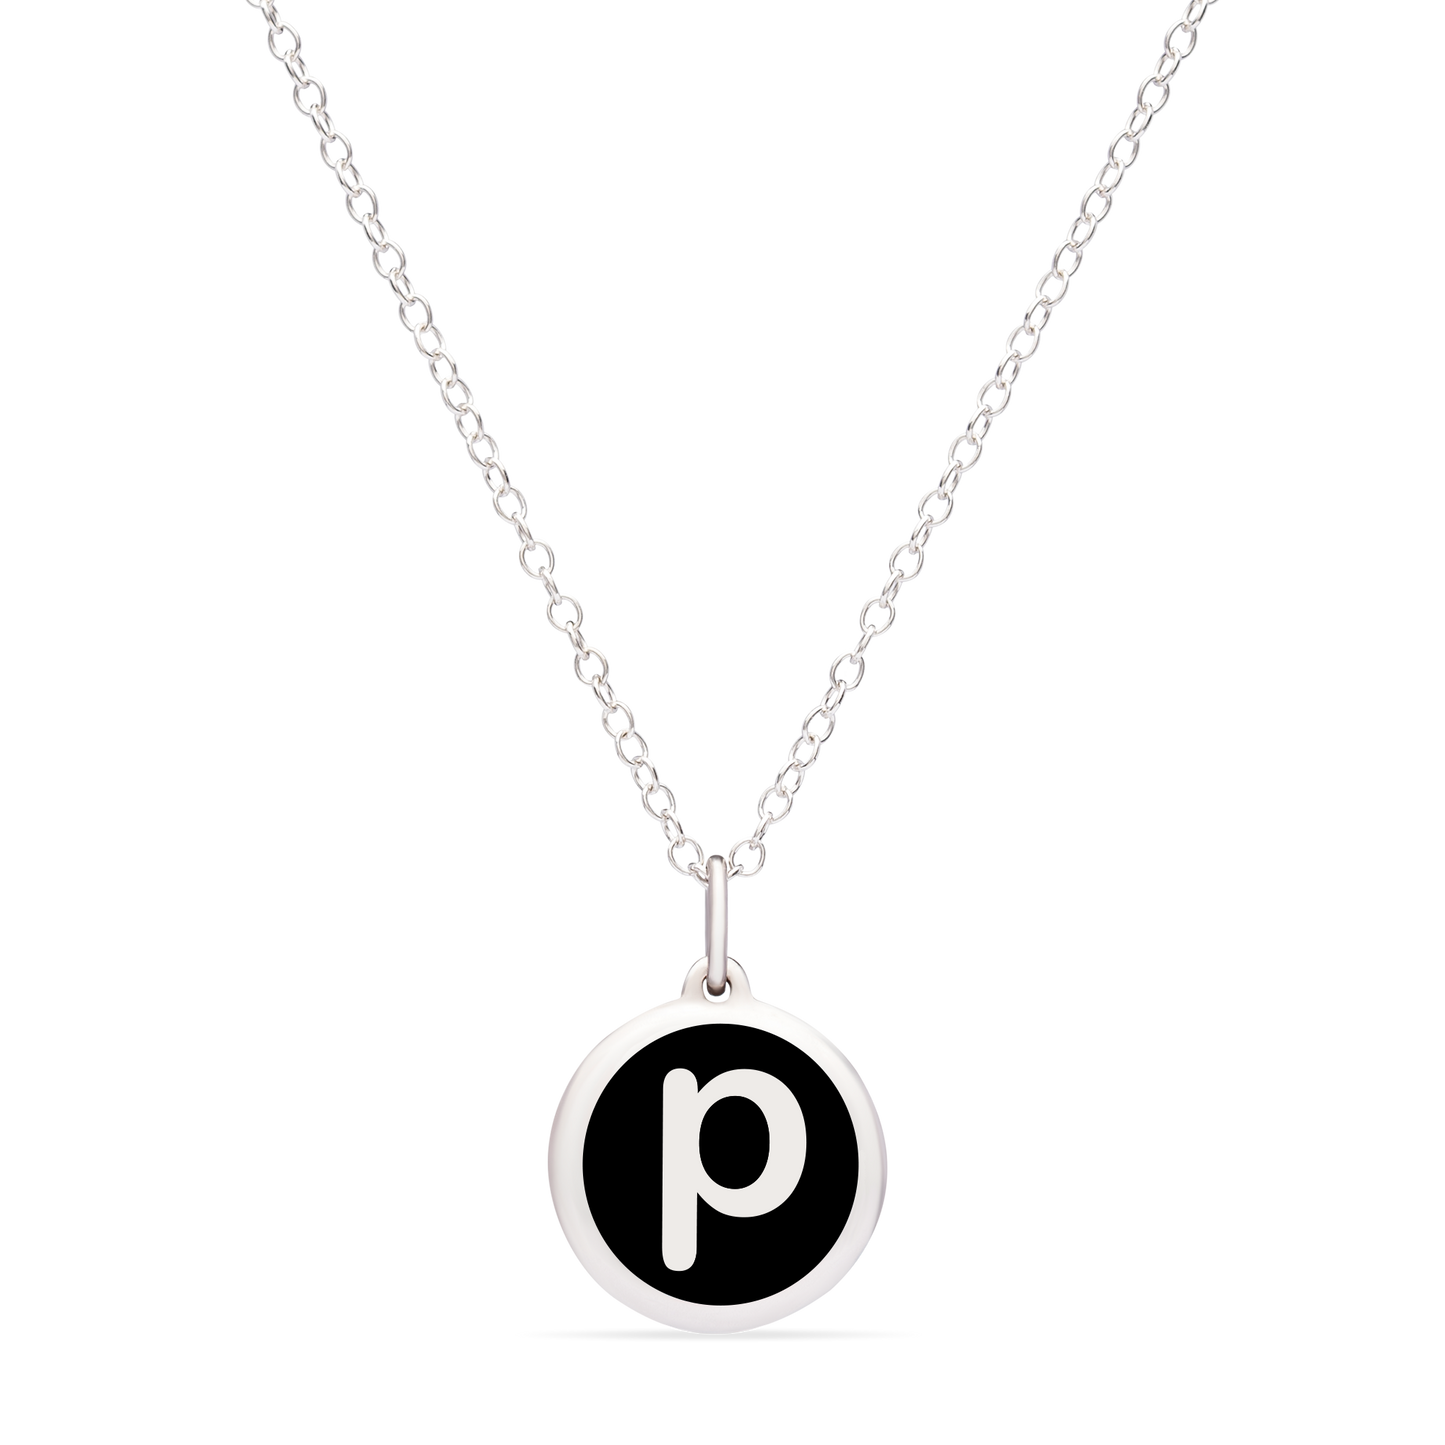 MINI INITIAL 'p' CHARM sterling silver with rhodium plate